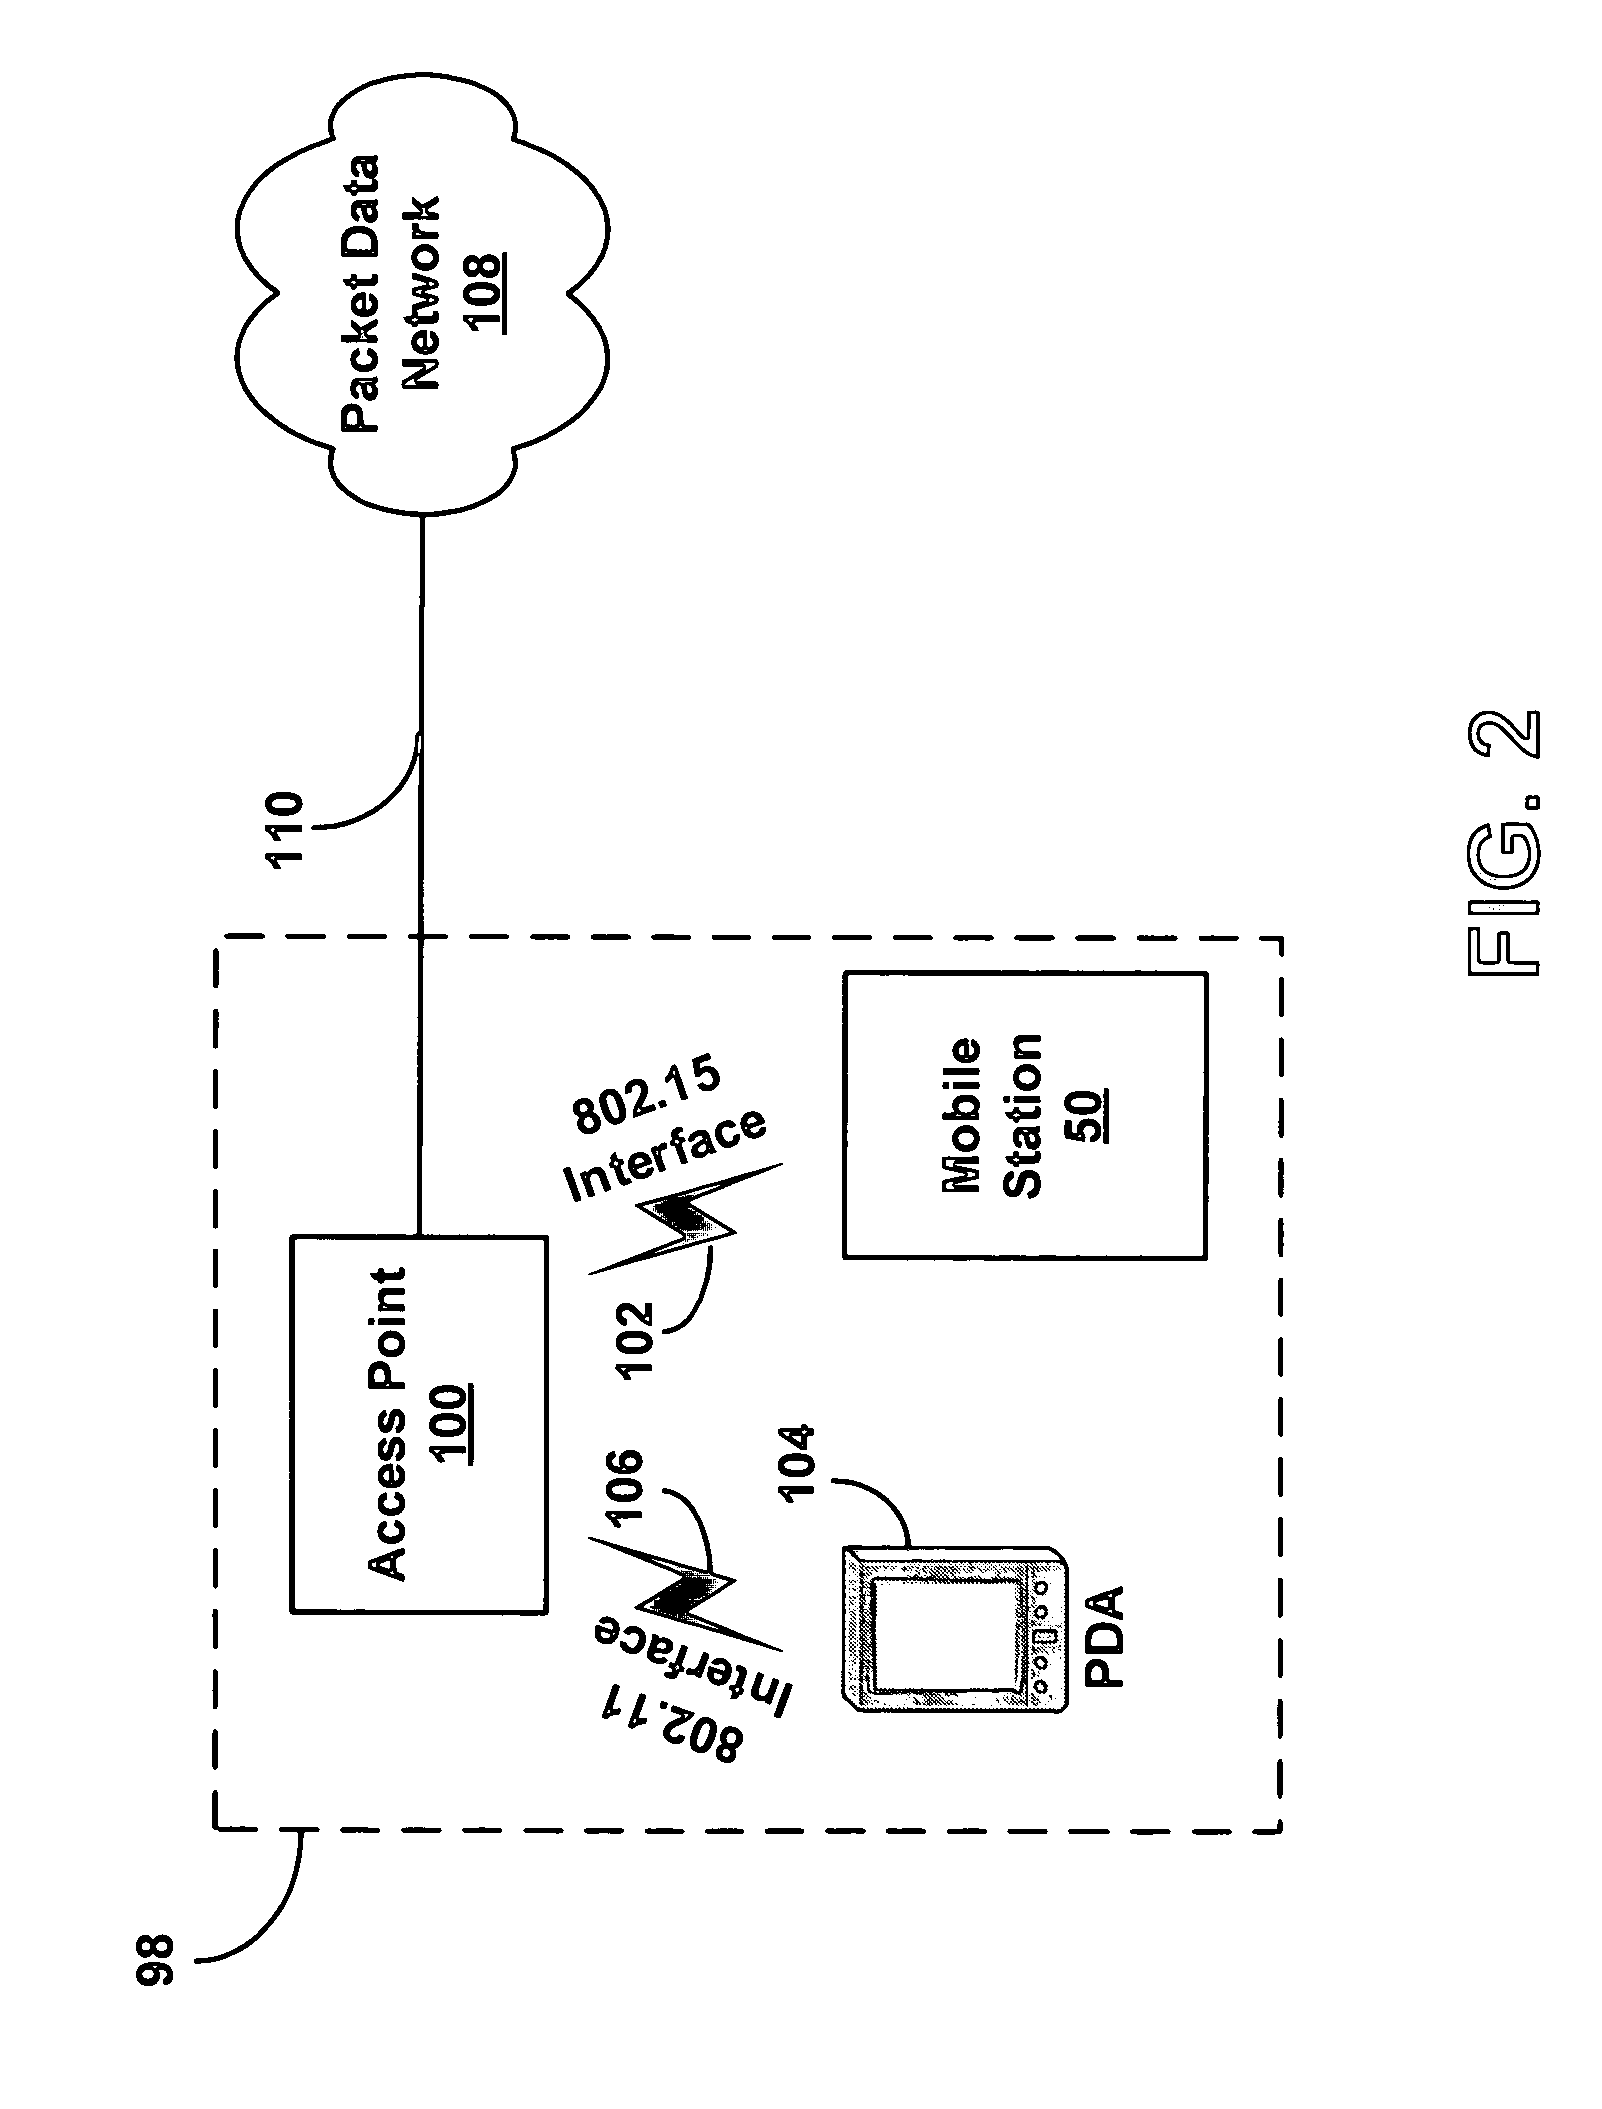 Method and system for asymmetric handoff of wireless communication sessions